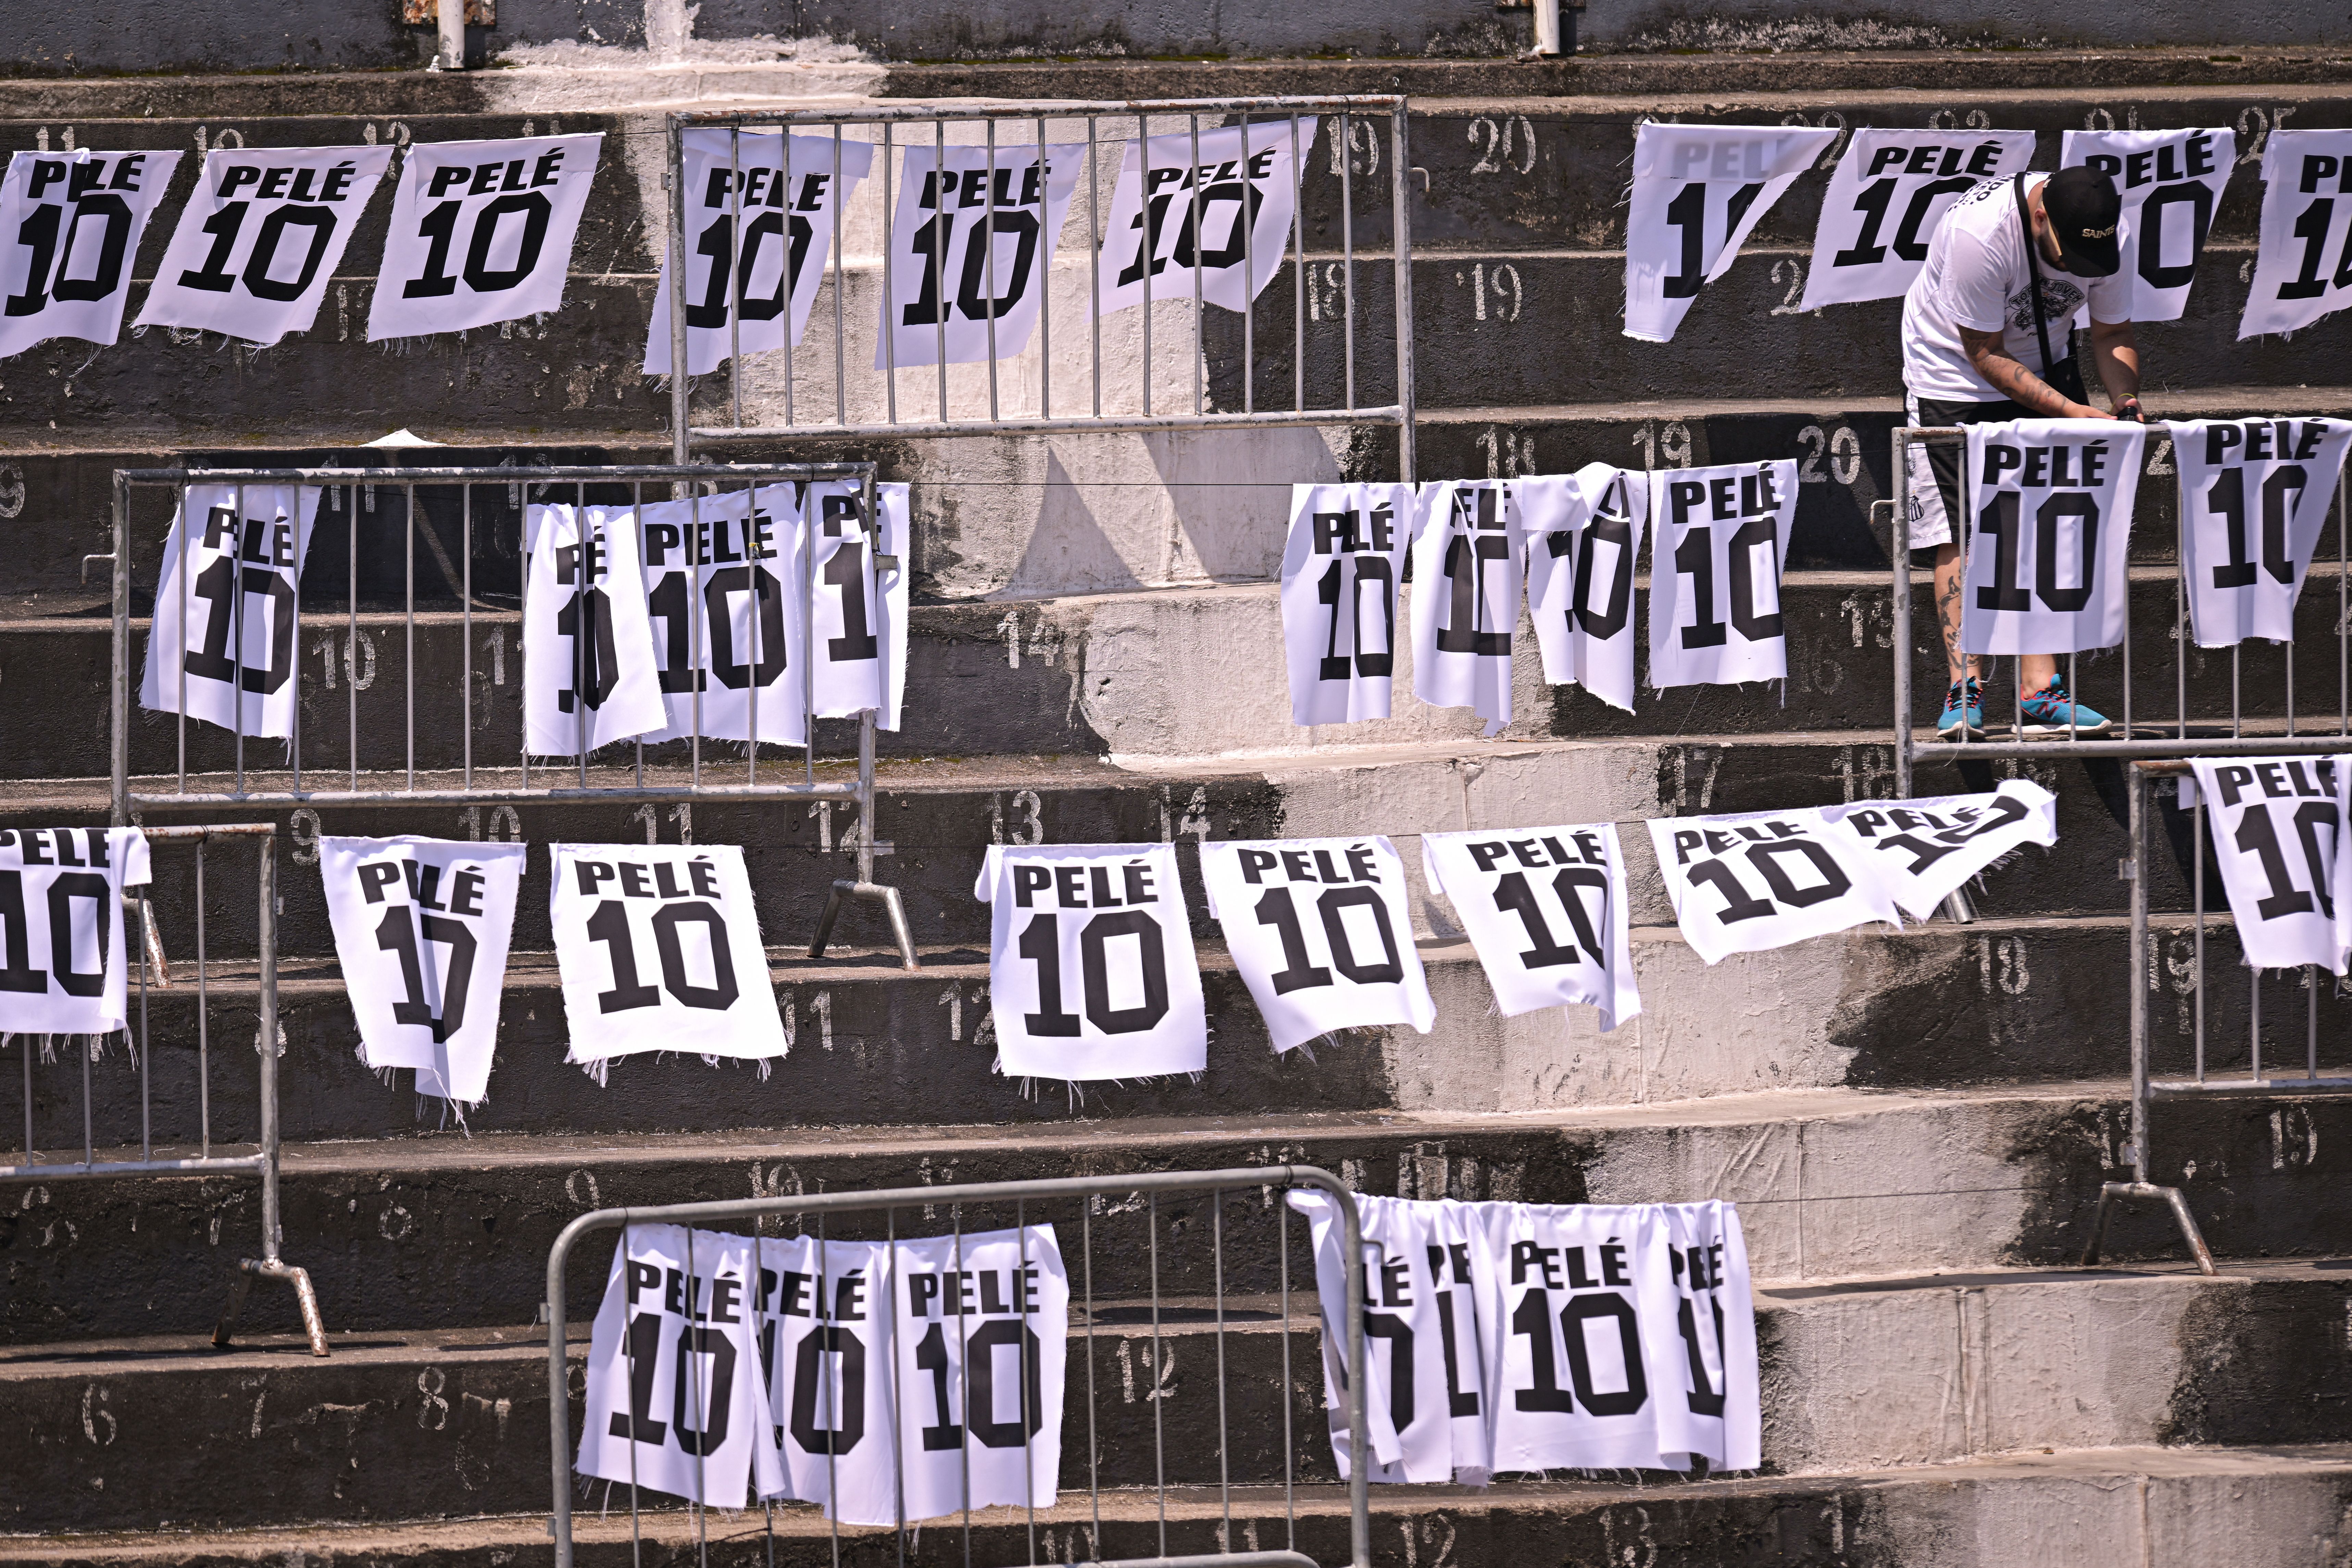 A mourner places banners on the Vila Belmiro stadium stands during Pelé's funeral on January 02, 2023 in Santos, Brazil